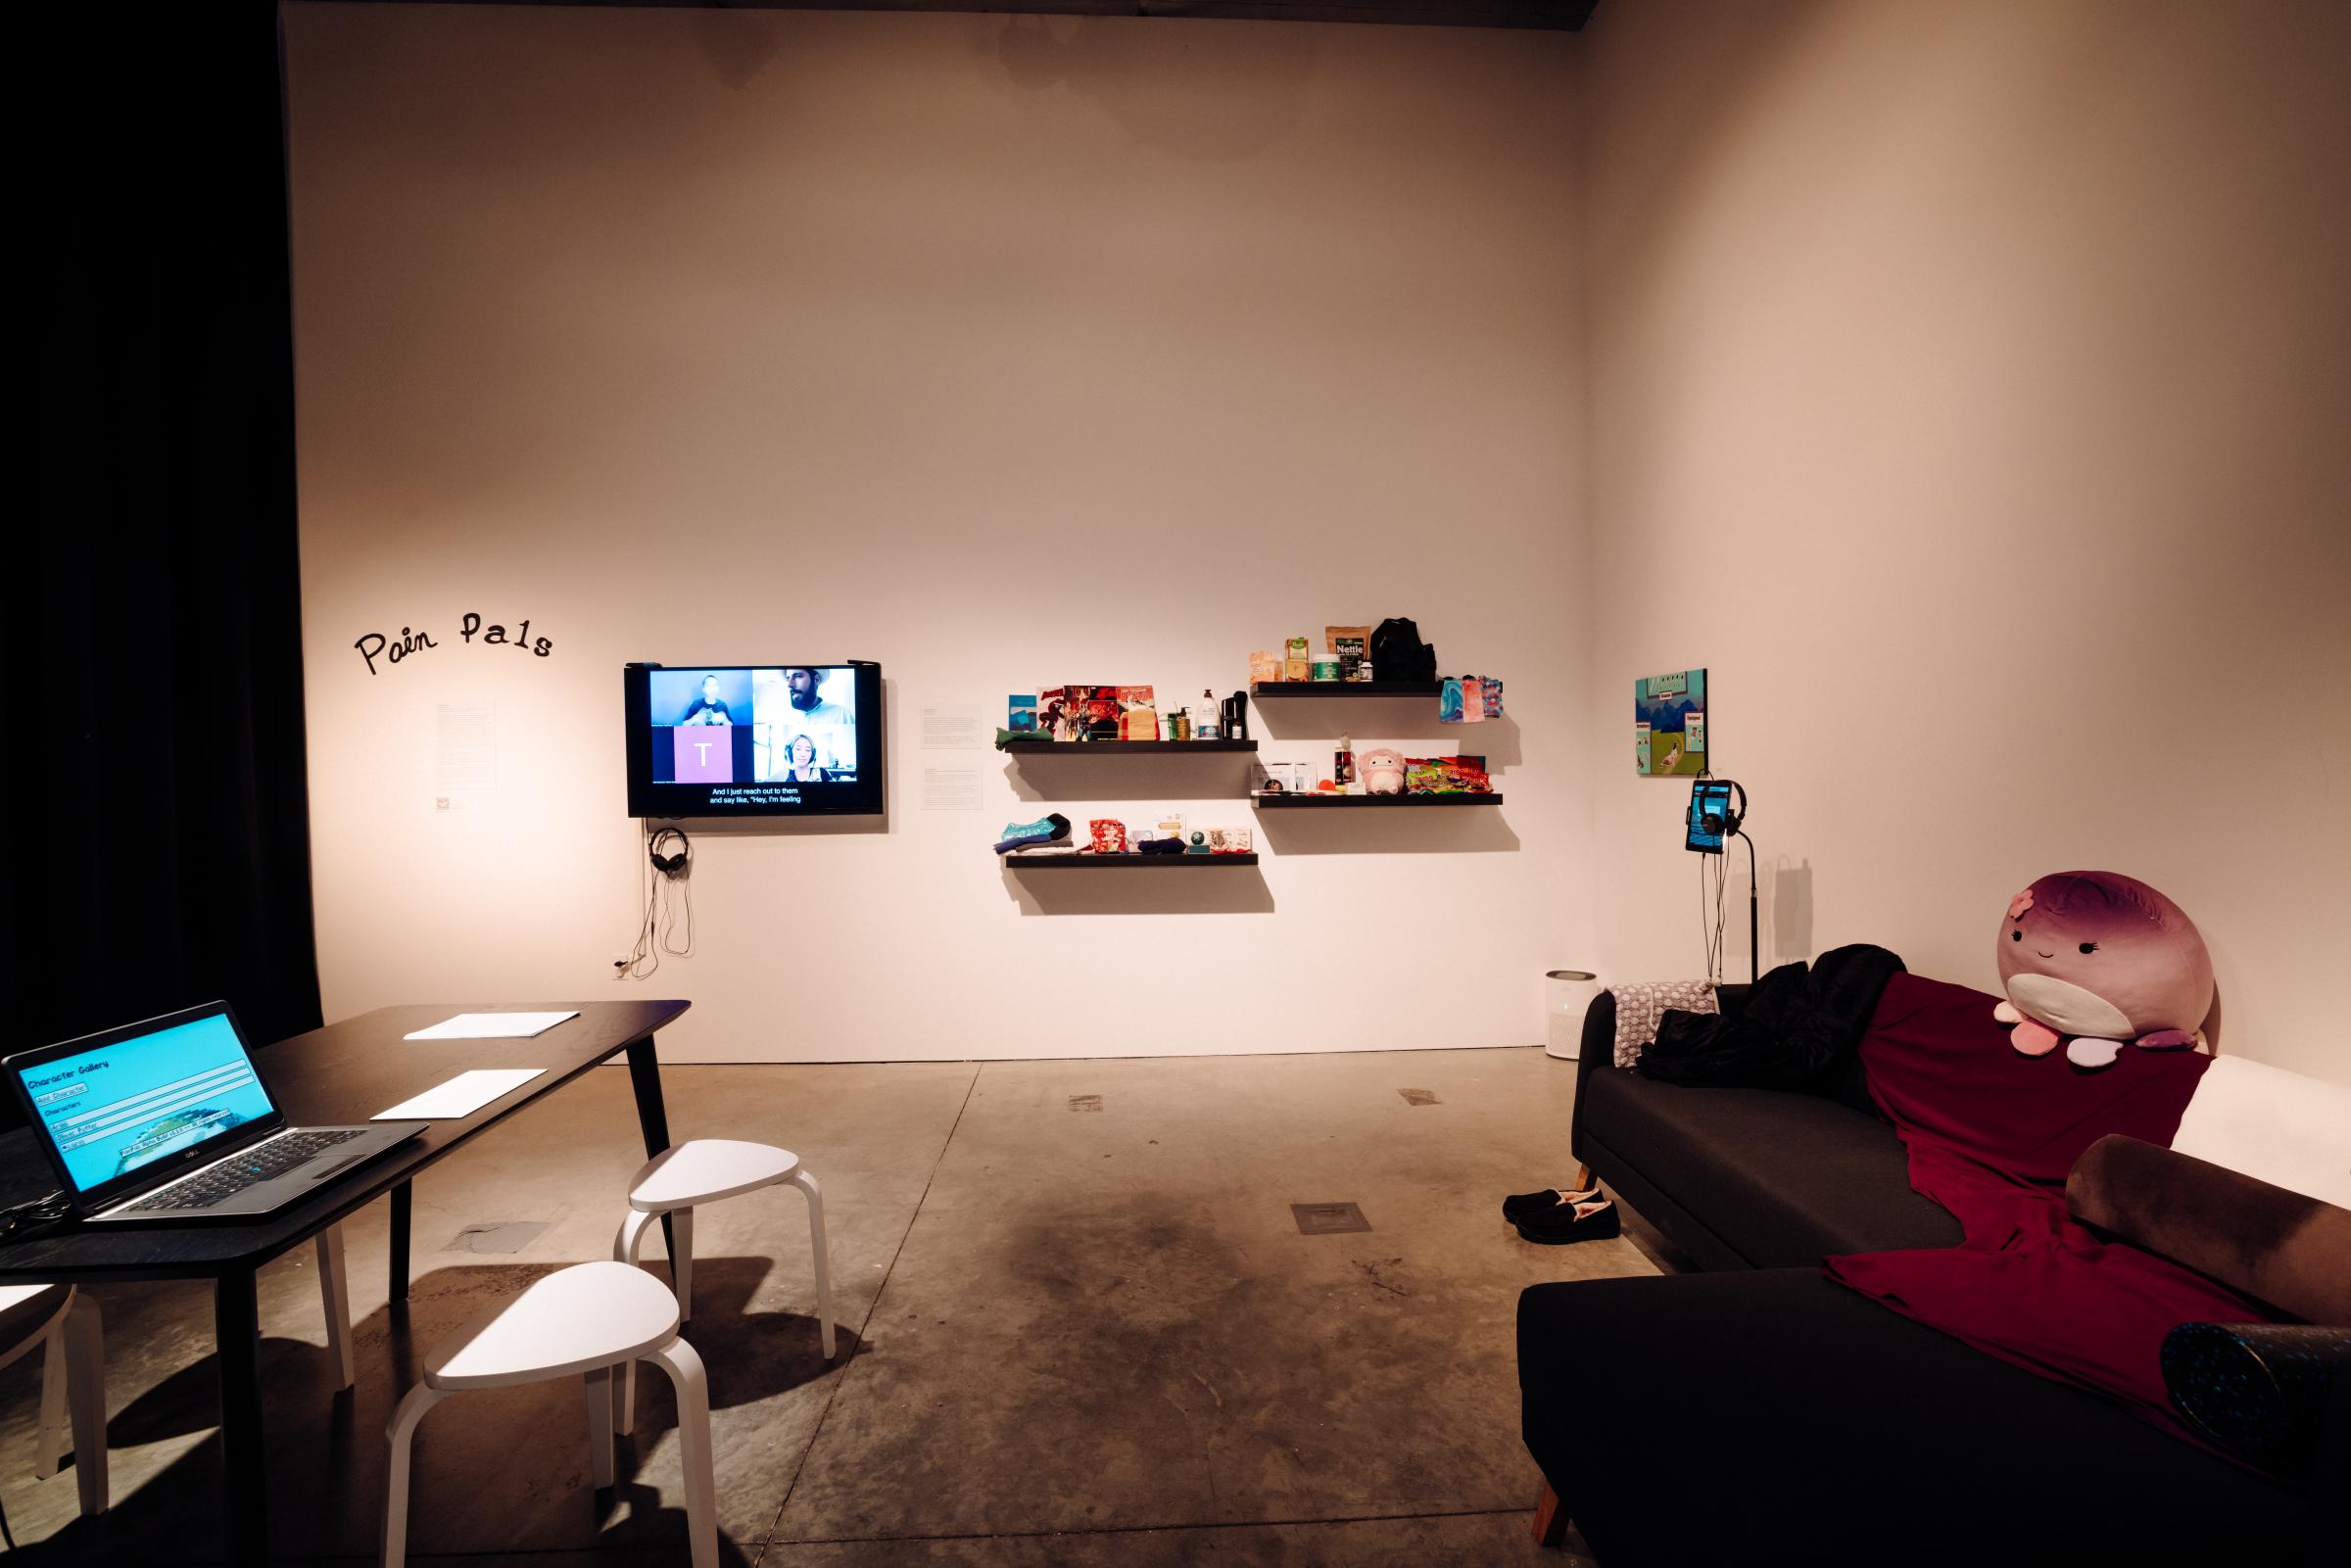 A dining table with four low white stools is positioned in front of a large wall-mounted screen.Floating black shelves with an assortment of self-care items bear a variety of items, including stuffed animals, snacks, pamphlets, heating pads, lotion, compression socks, Vitamin C packets, comic books. Against the gallery’s back wall is an L-shaped upholstered dark gray couch and a cozy robe. An iPad is mounted on a stand with headphones.

